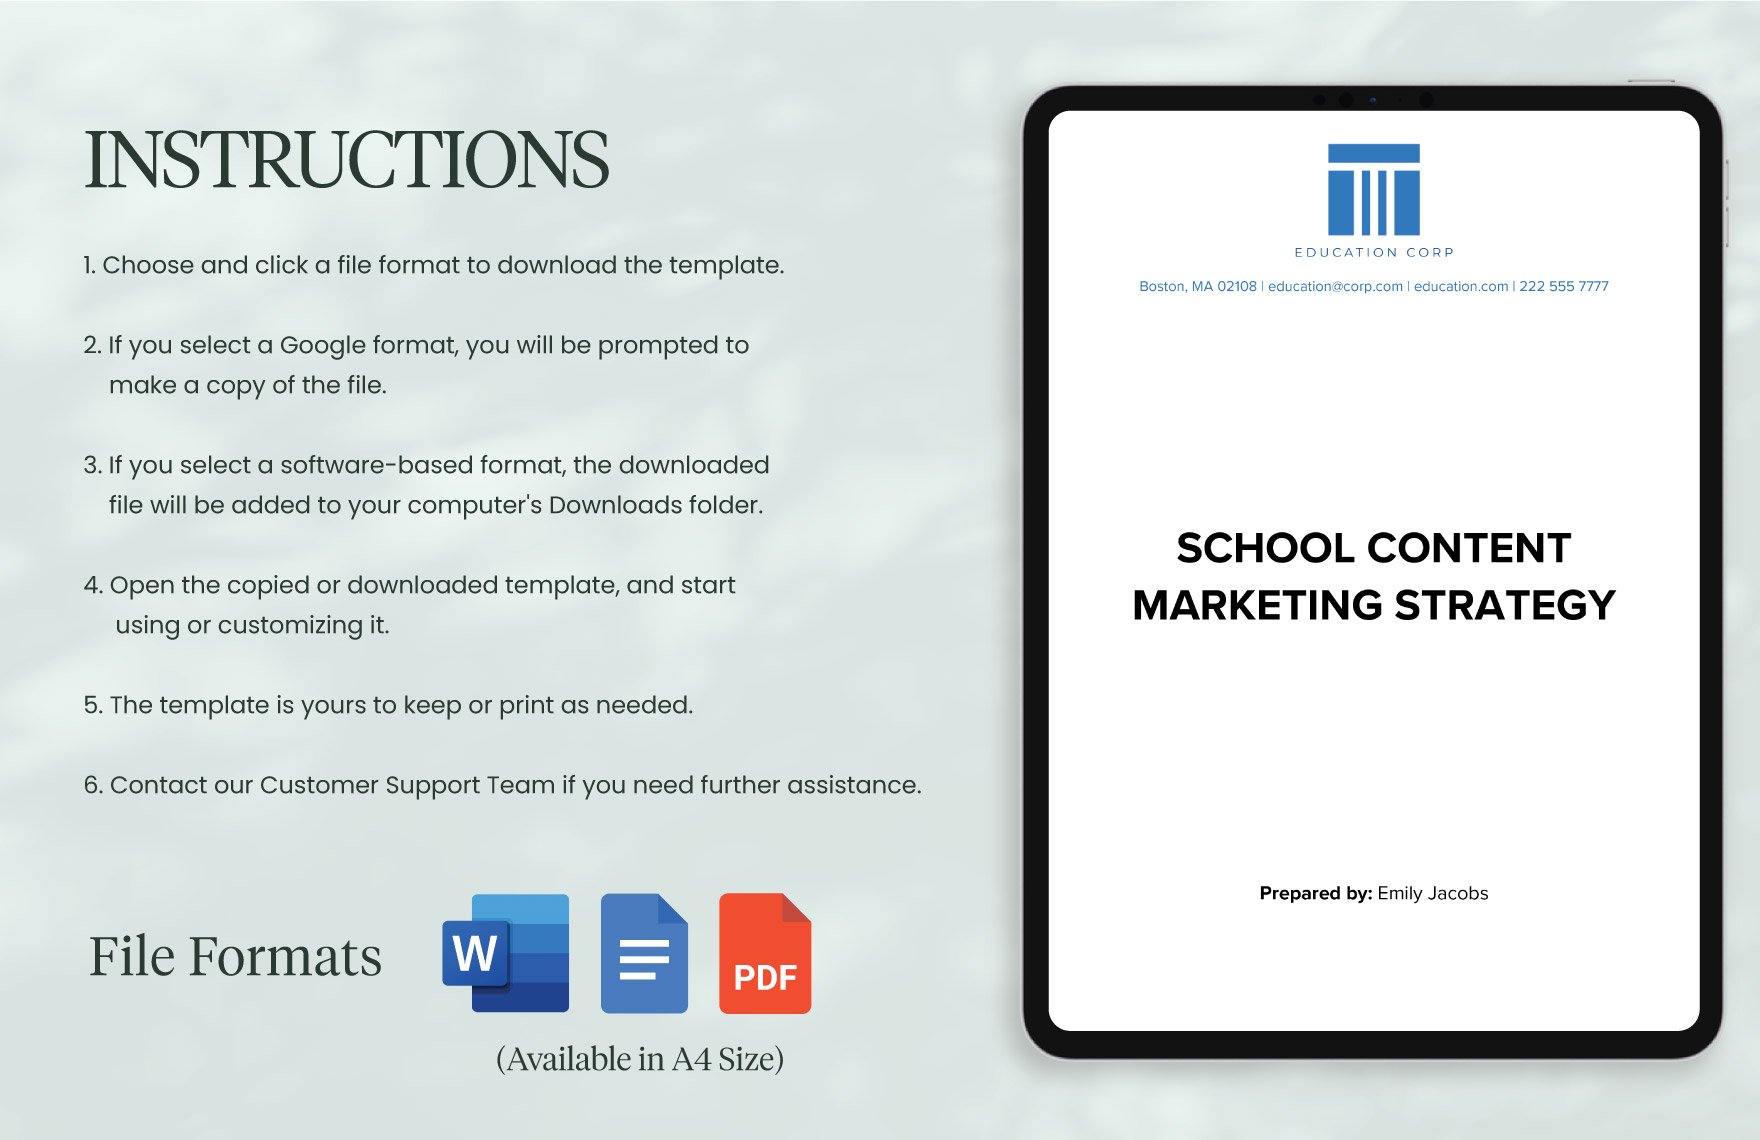 School Content Marketing Strategy Template